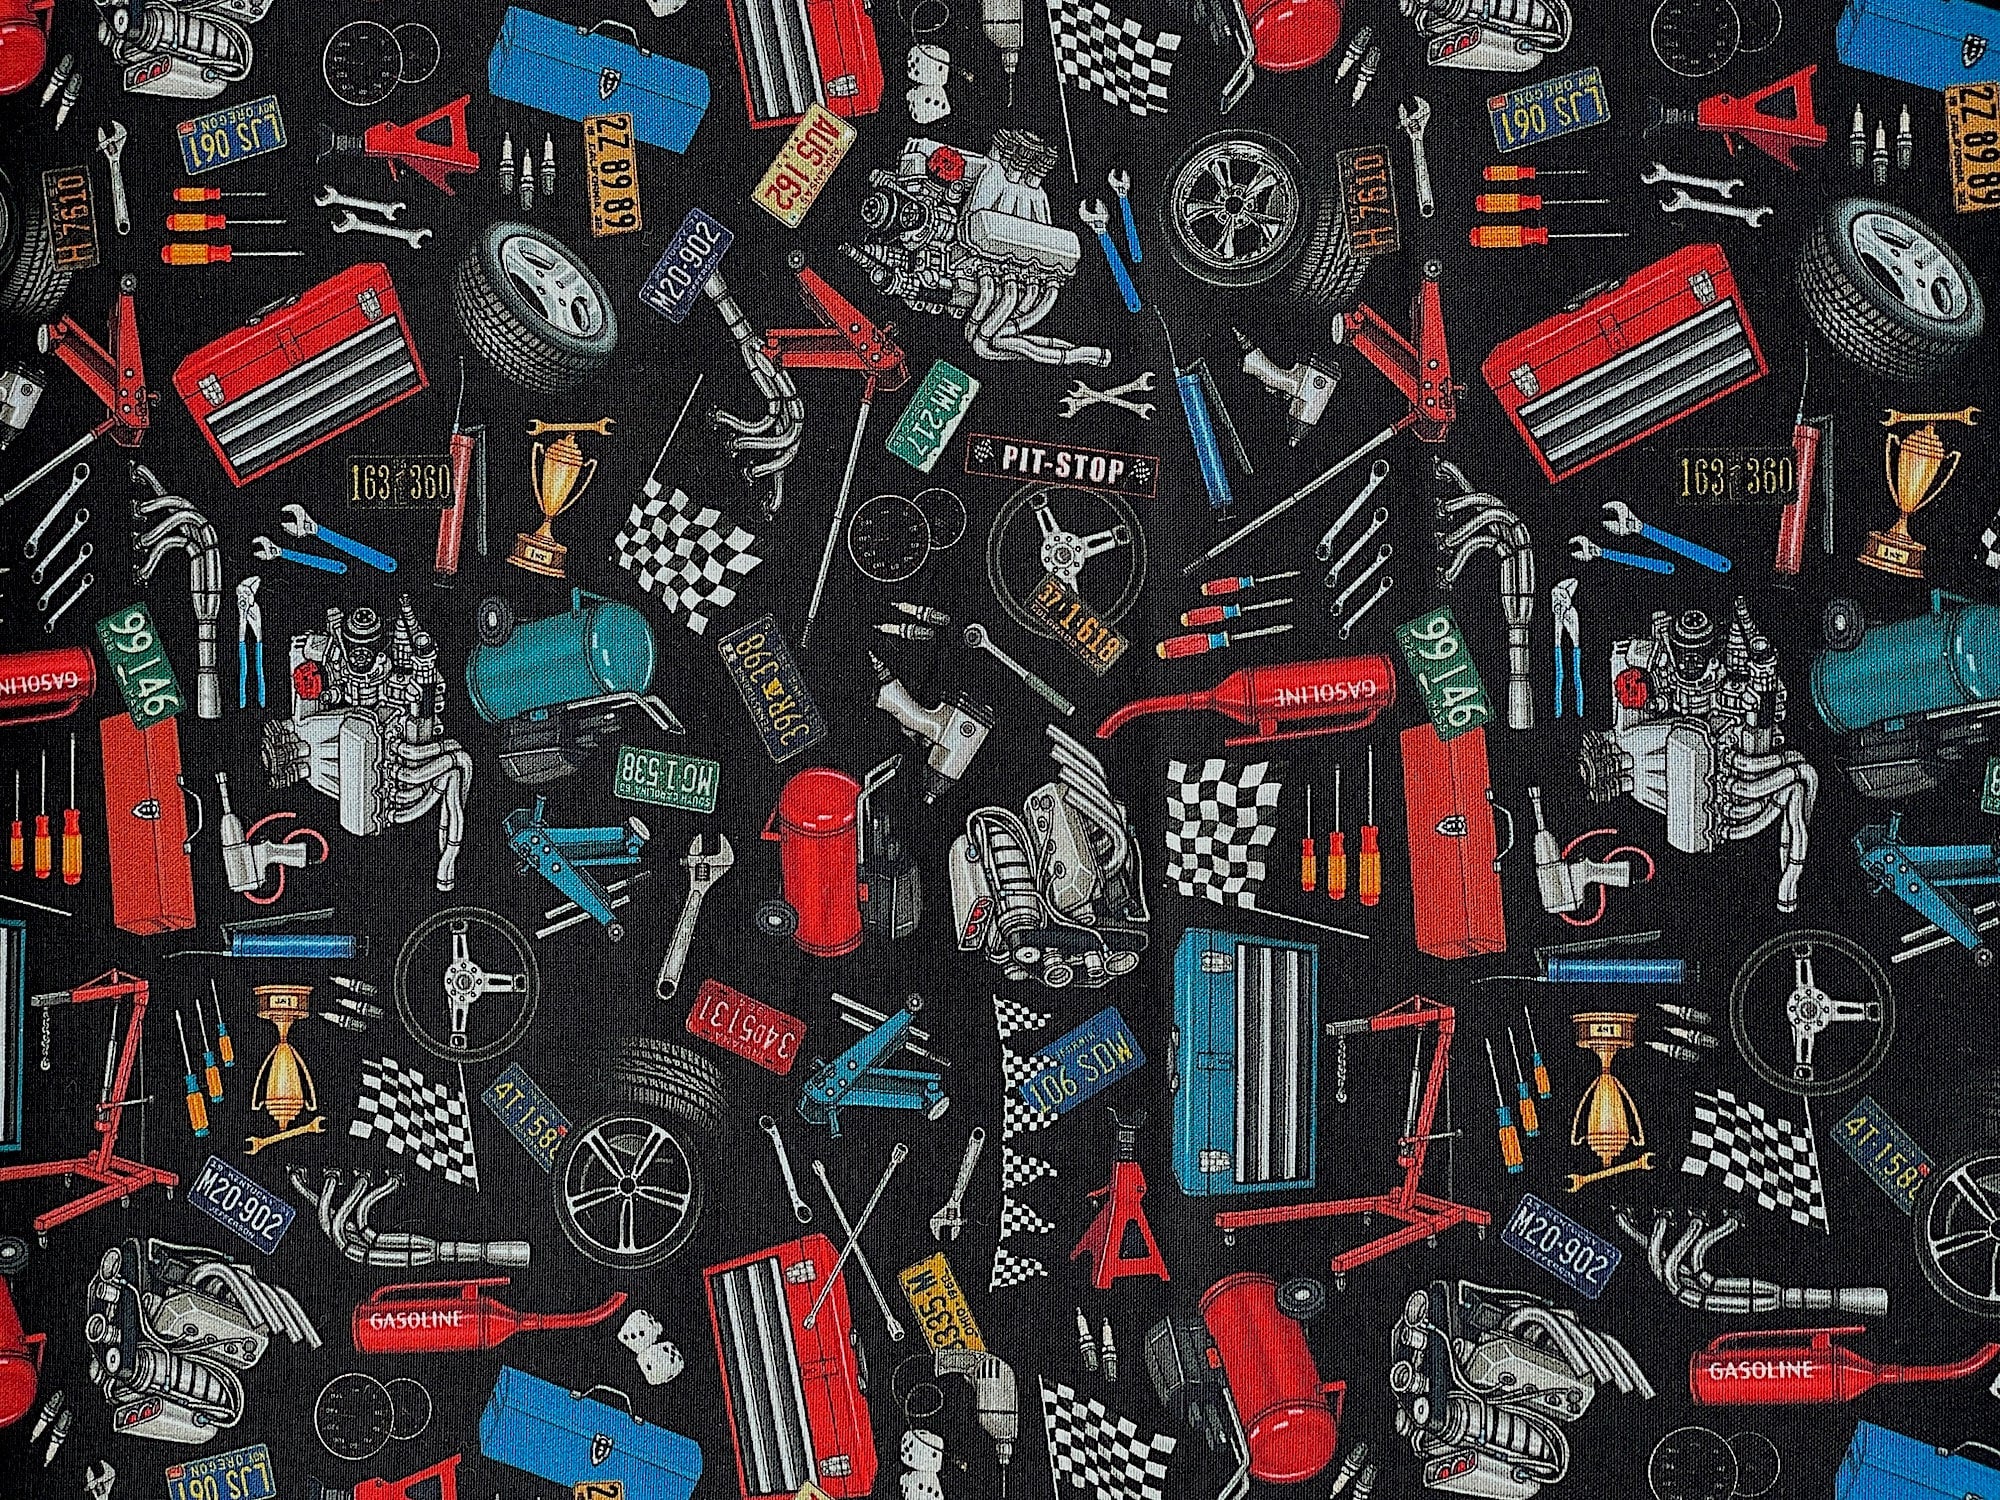 This black cotton fabric is covered with car parts and tools. You will find tool boxes, air compressor, motors, wheels, flags, license plates, pliers and more.